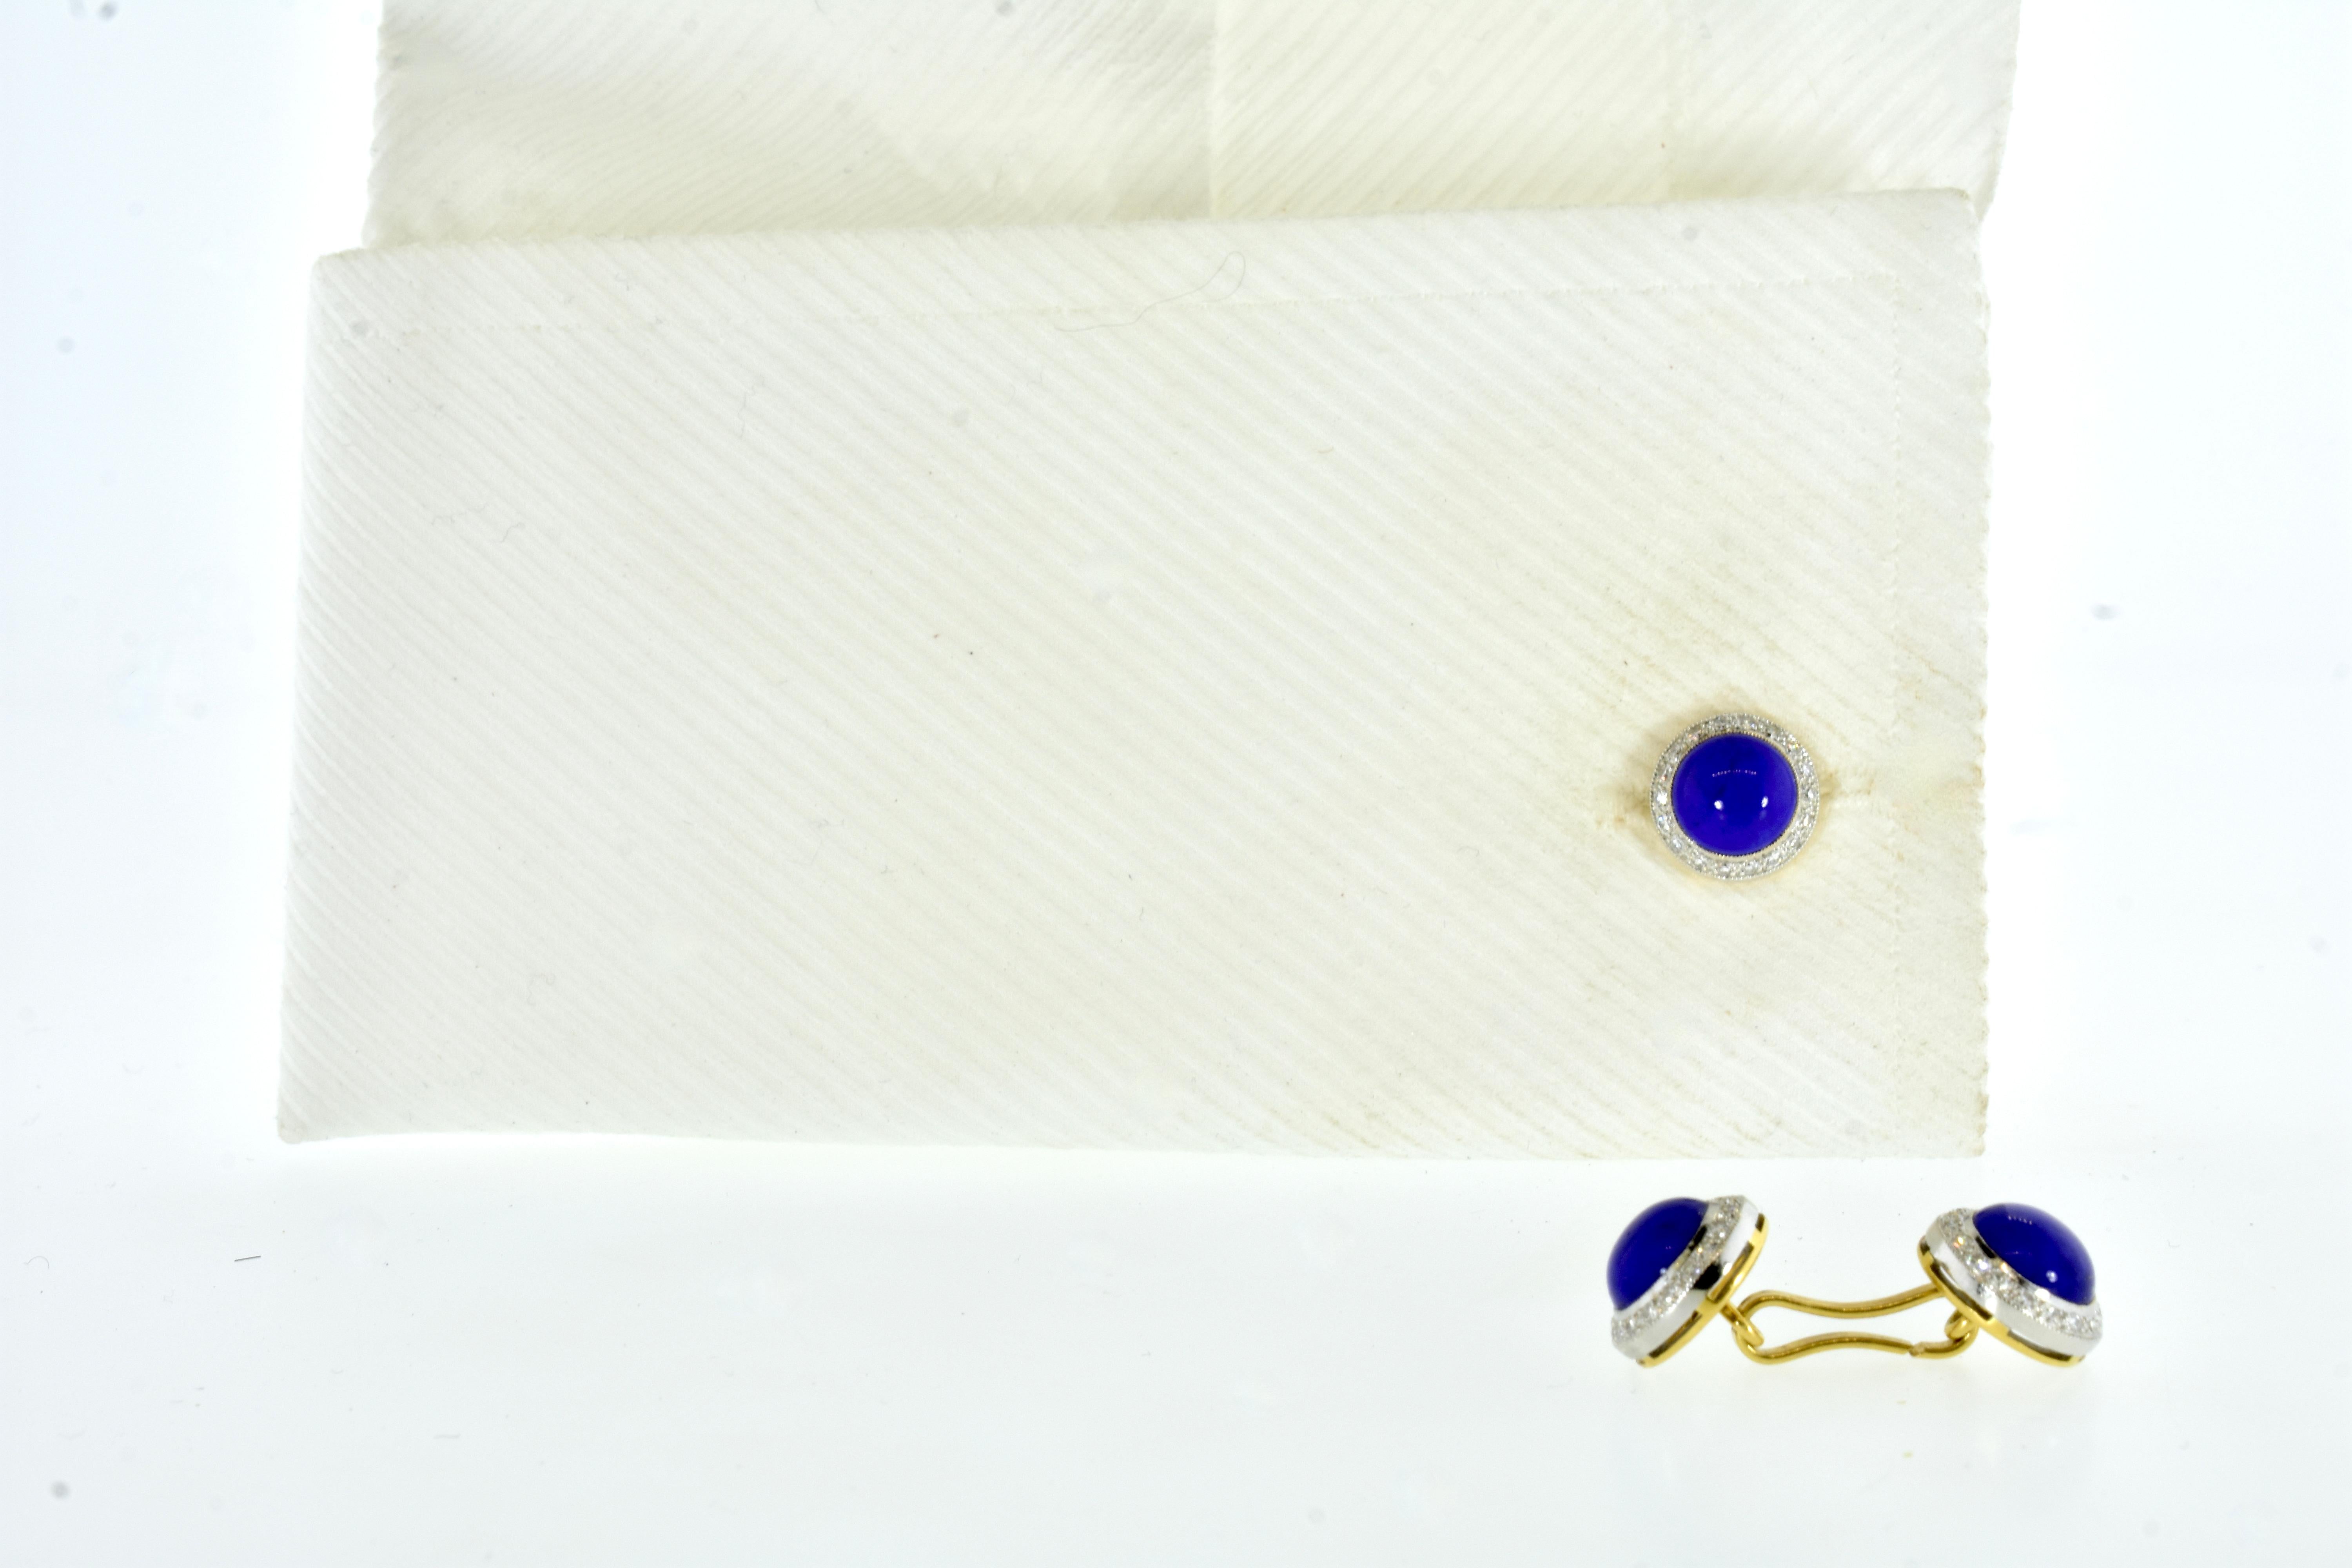 Cufflinks and Stud set, also called a dress set, Lapis Lazuli and diamond 18K French in  yellow and white gold.  The 8 fine blue lapis match well in both their cabochon cut and vivid blue color.  The diamonds surrounding each lapis are bead set in